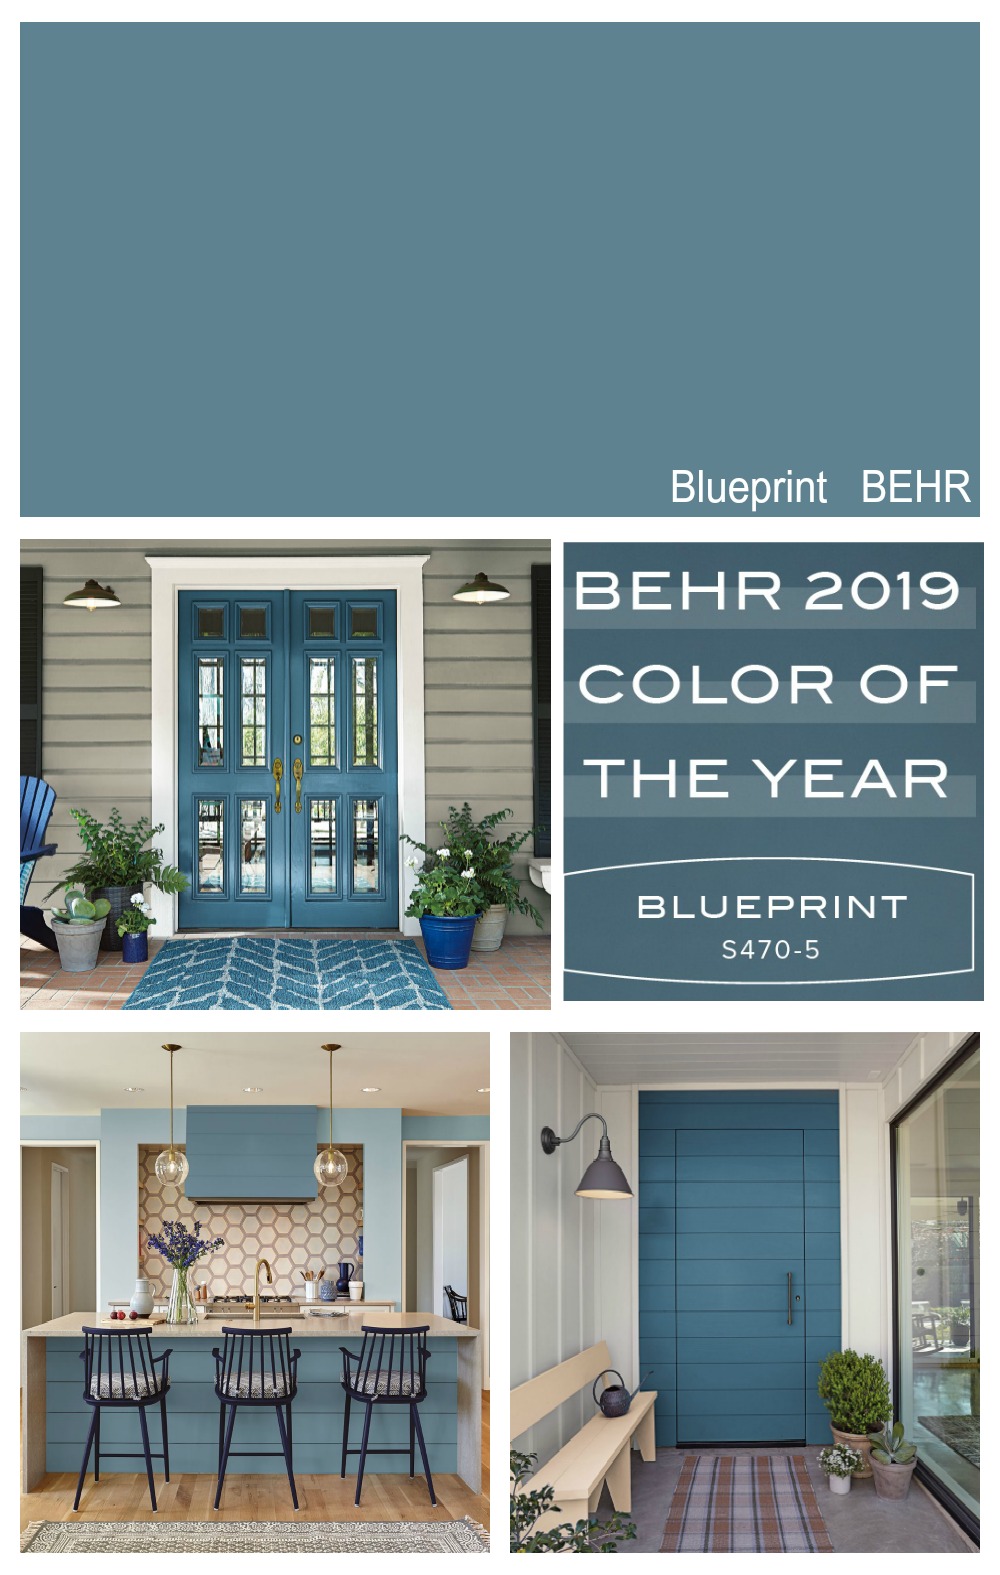 2019 BEHR Color of the Year